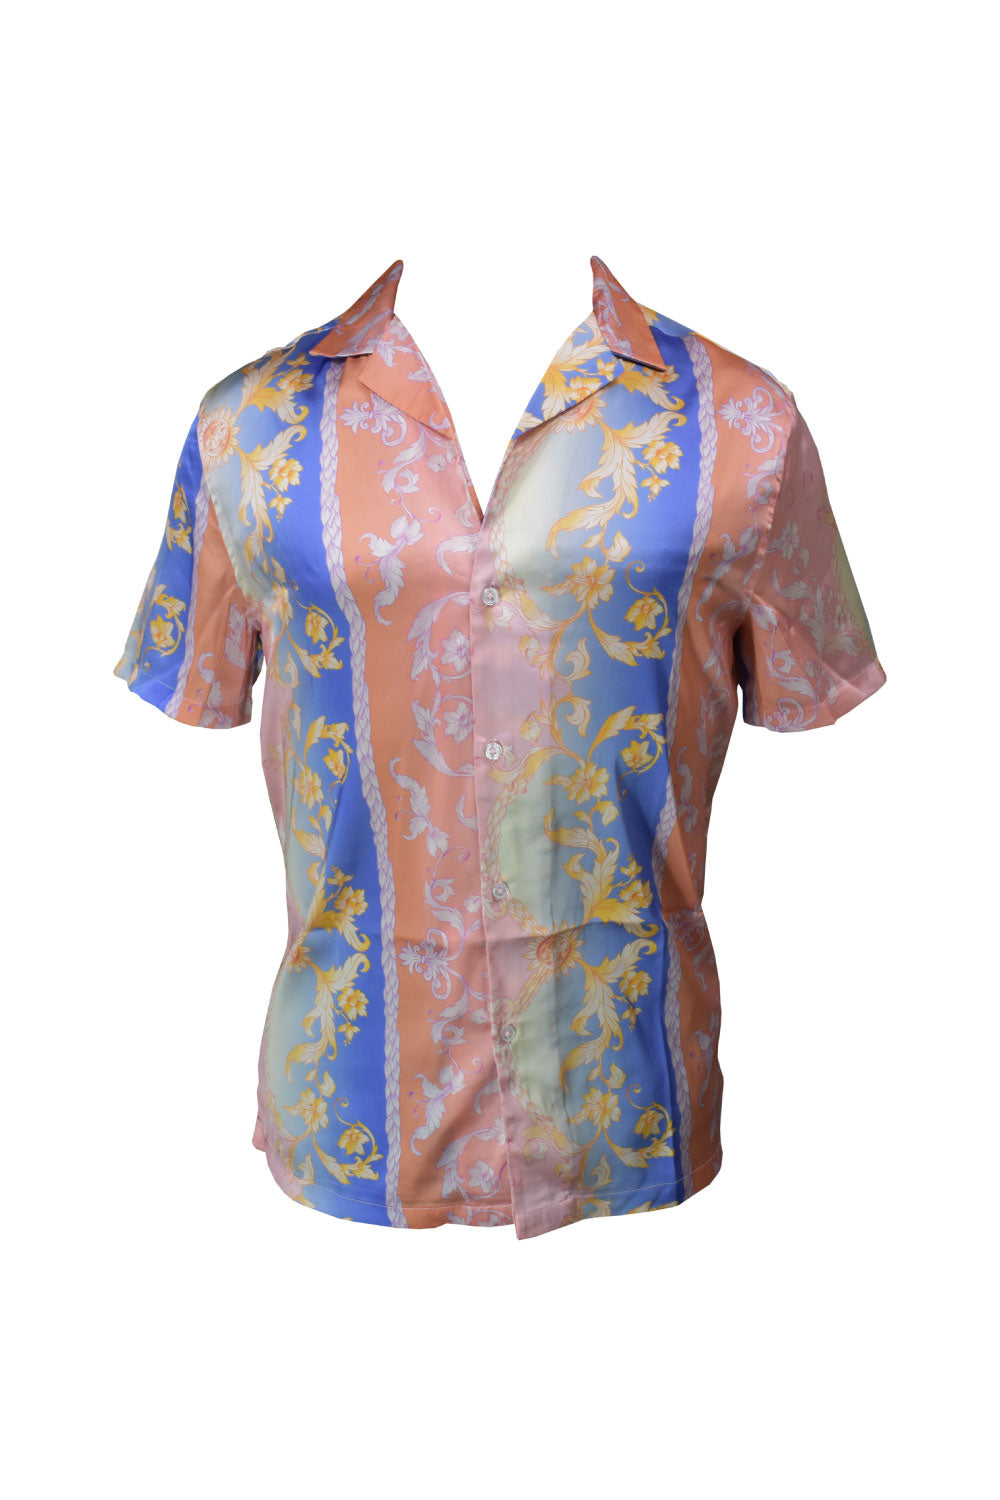 Image of the front of the Gold Floral Mens Button-up Shirt.